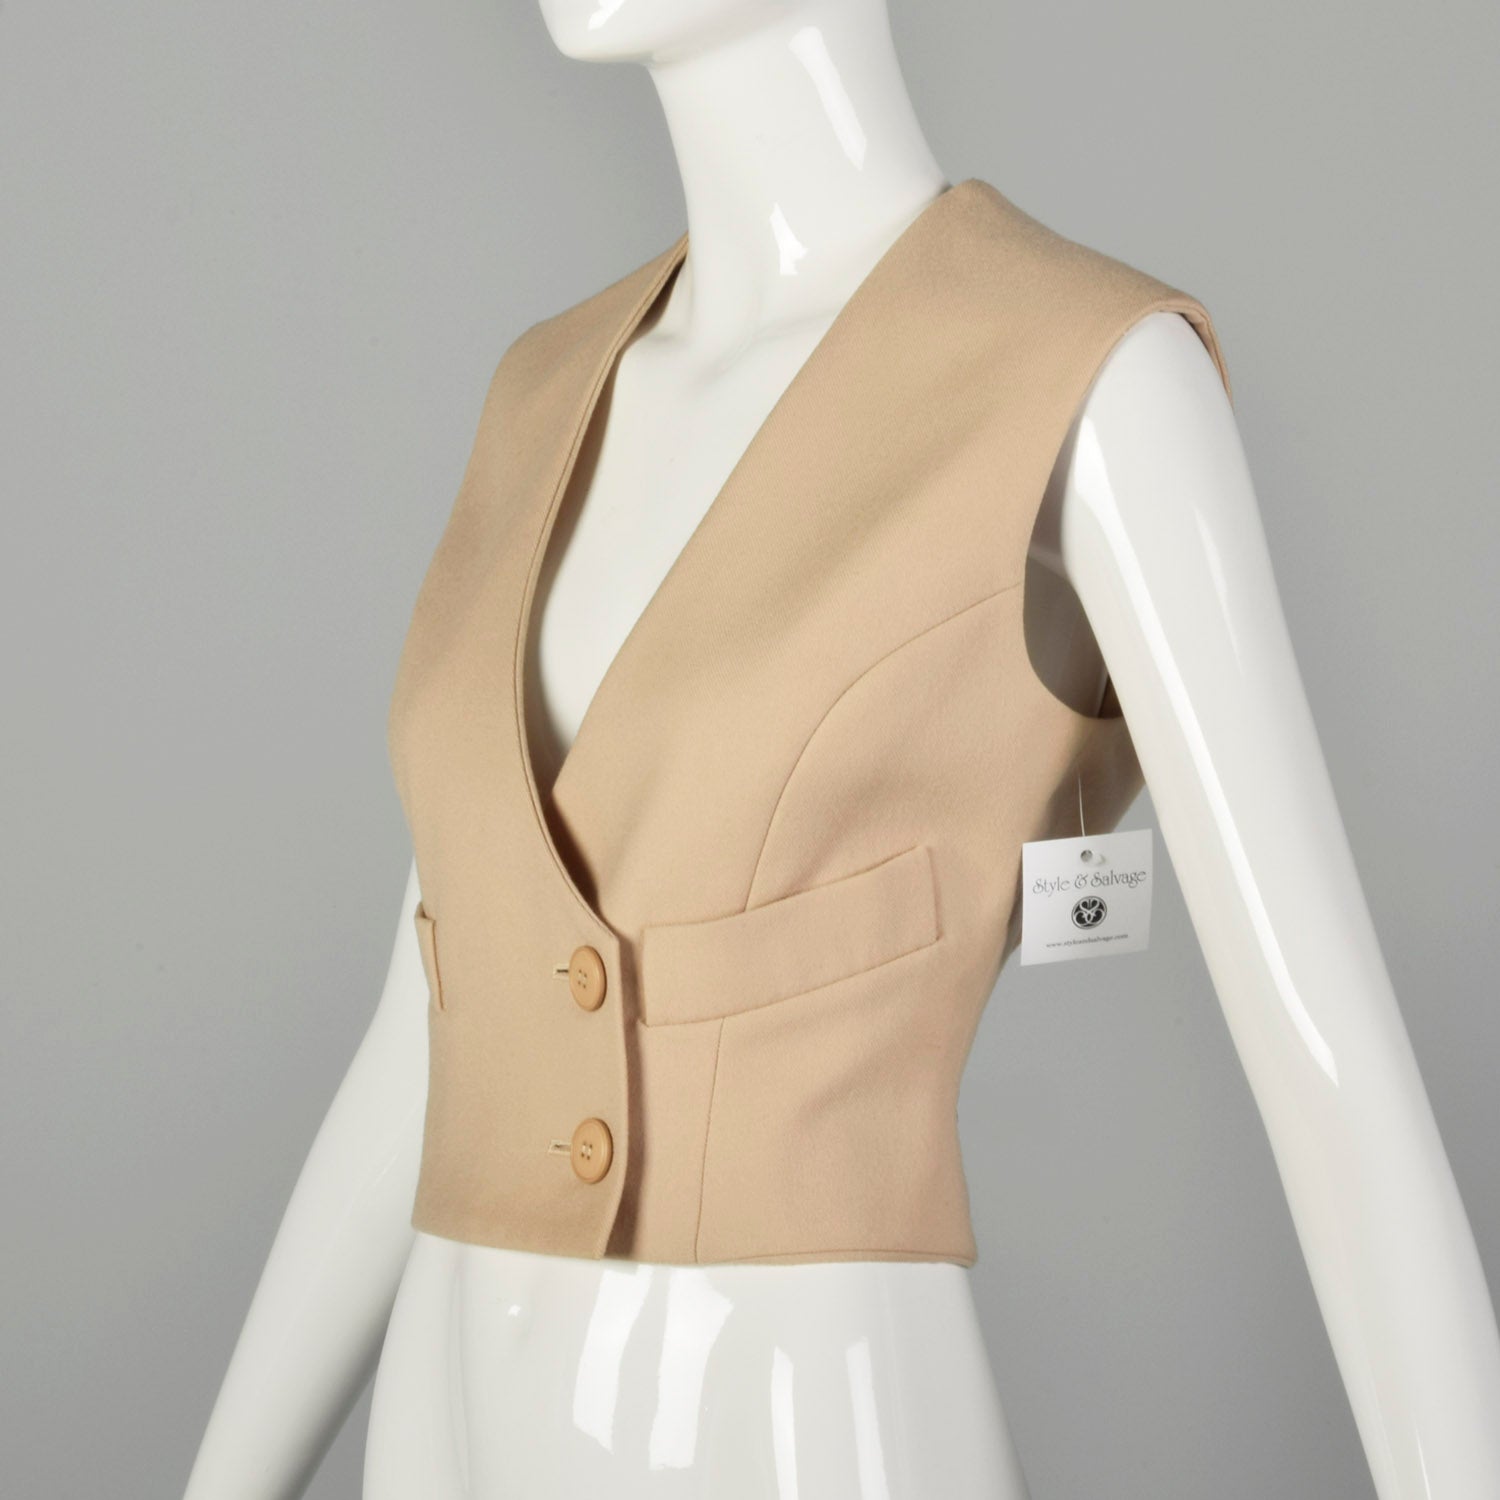 Small 1980s Numbered Christian Dior Boutique Minimalist Tan Wool Vest